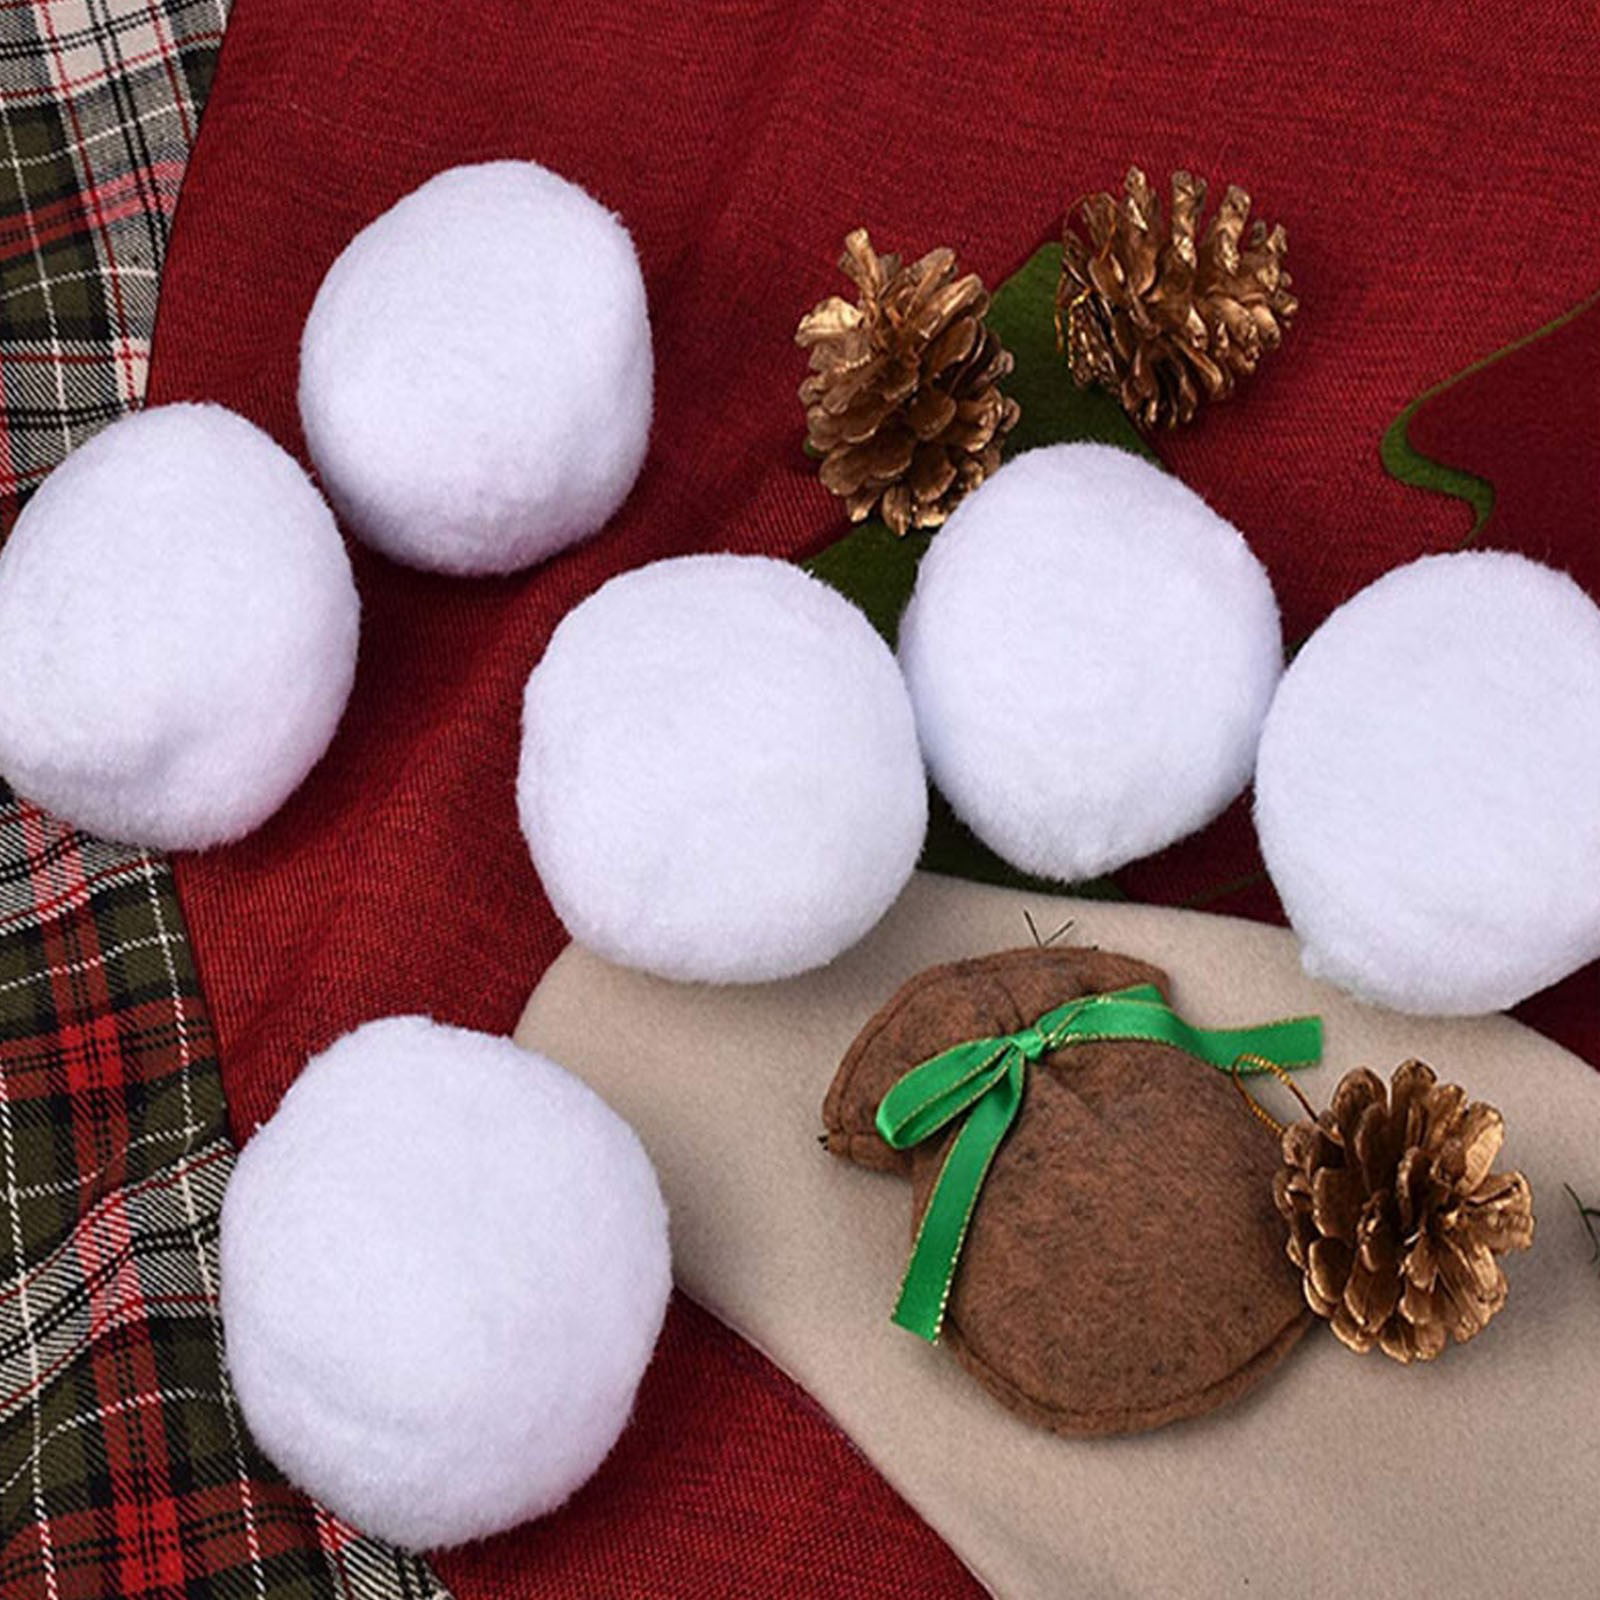 Indoor Snowball Fight With Shield Winter Game 12 White Soft Balls New Gift 